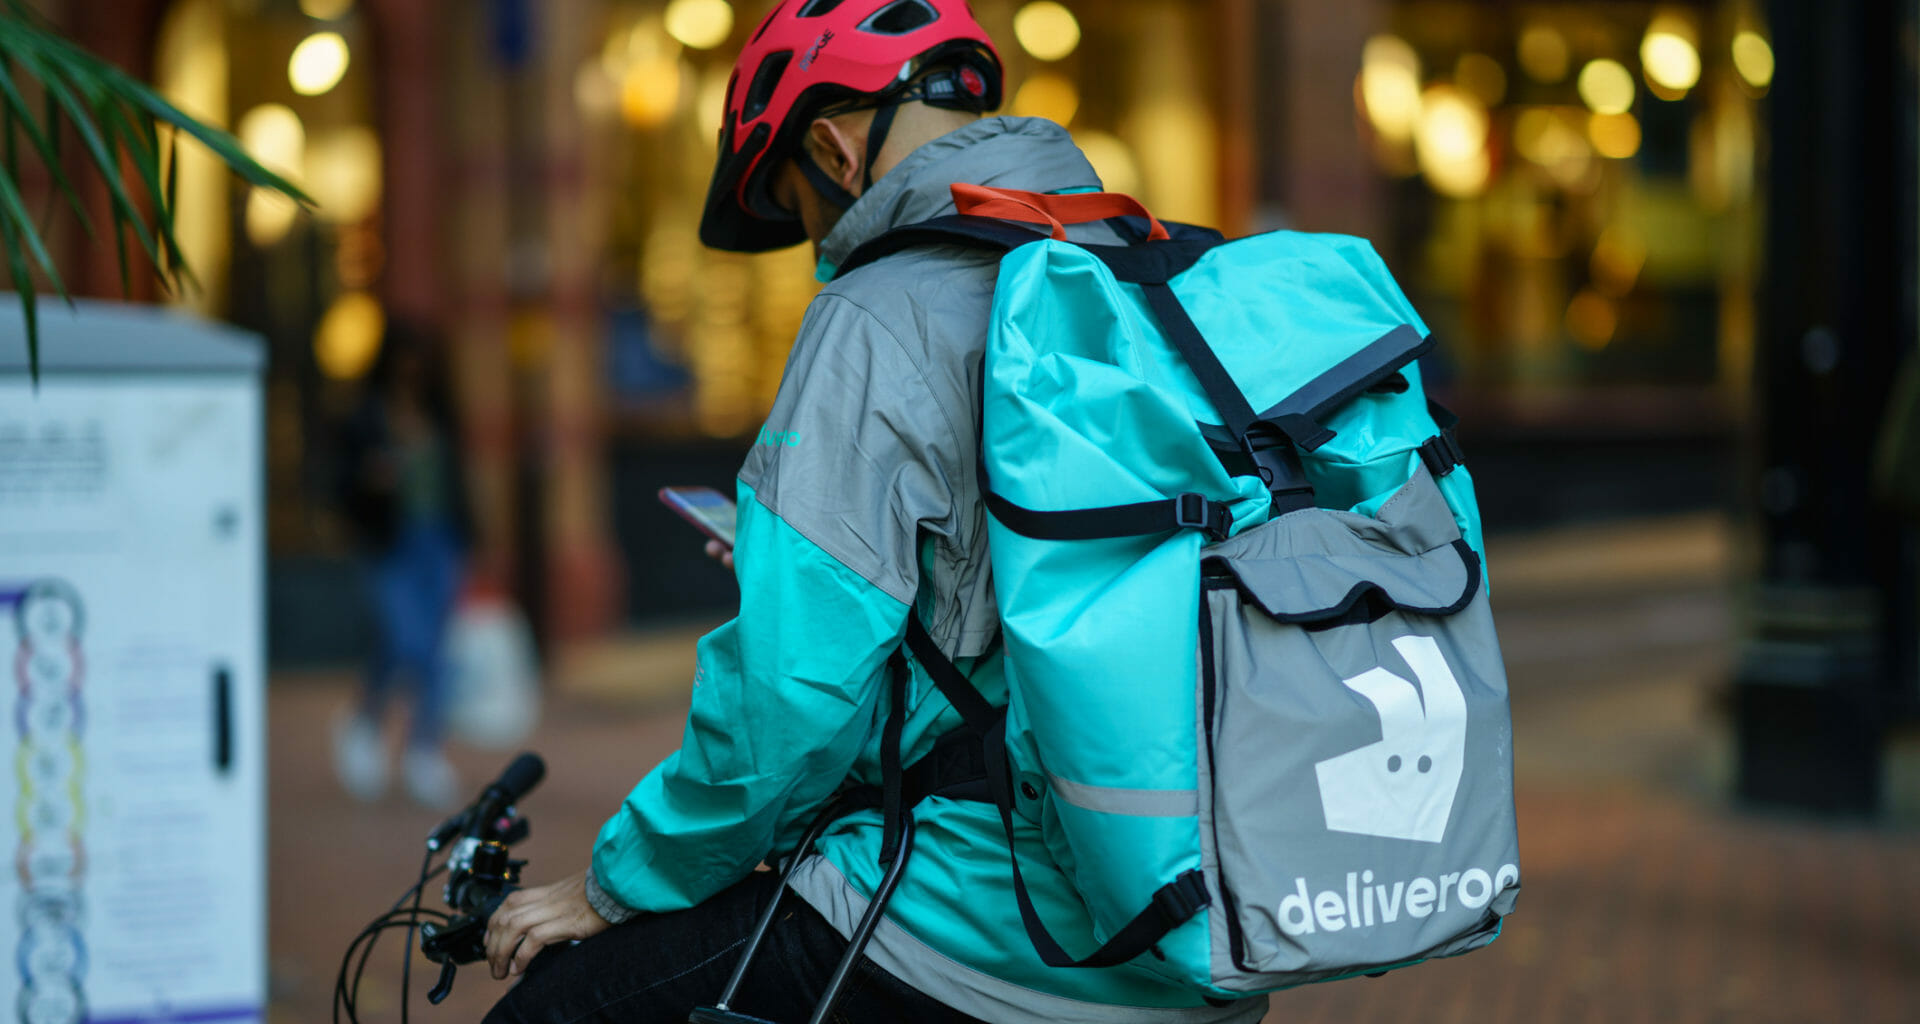 Food delivery firms must address rider safety concerns, say campaigners 3